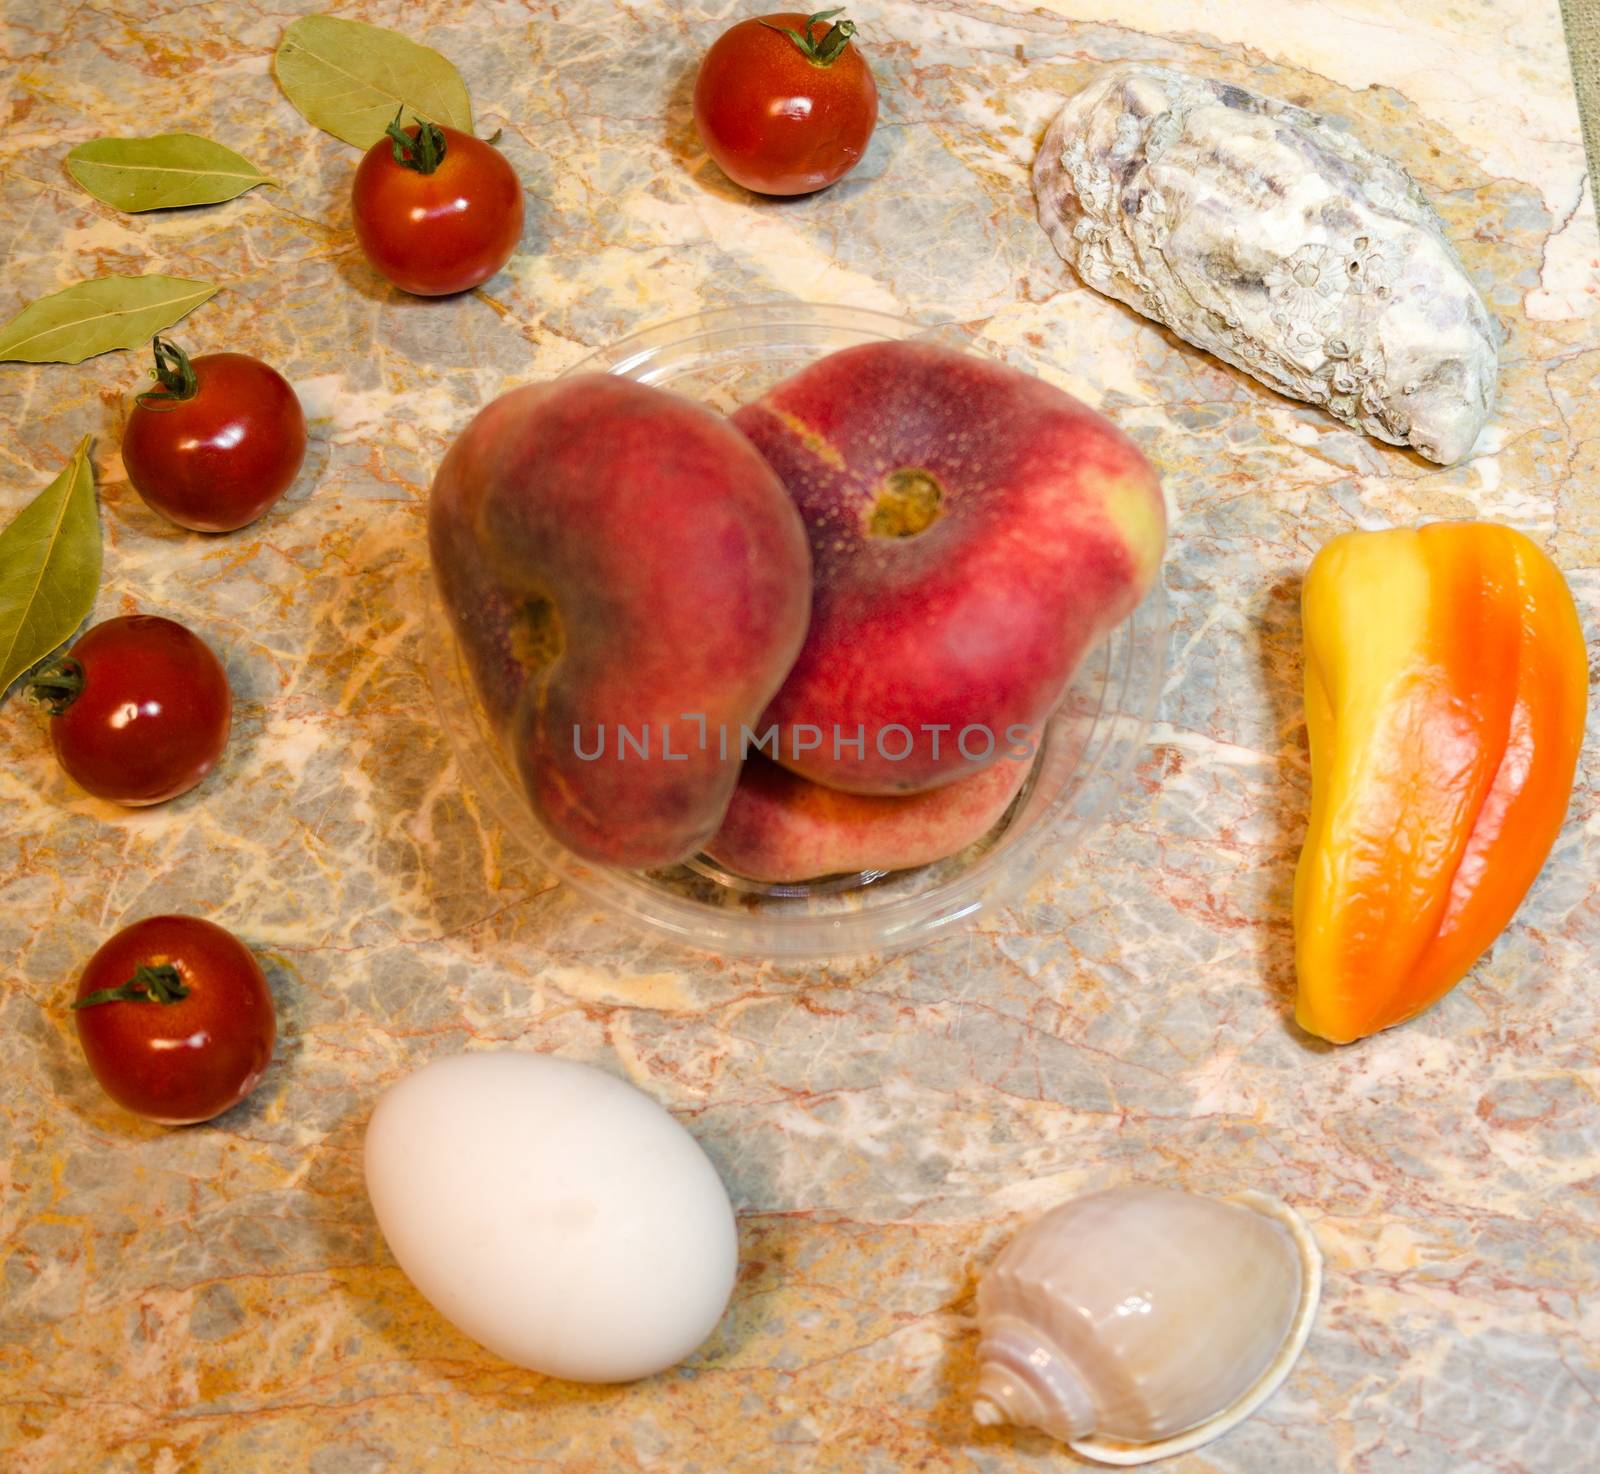 vegetables, fruits, seashells and peaches on a marble surface: cherry tomatoes, bell peppers, bay leaves, oyster, seashell, fig peaches and a chicken egg